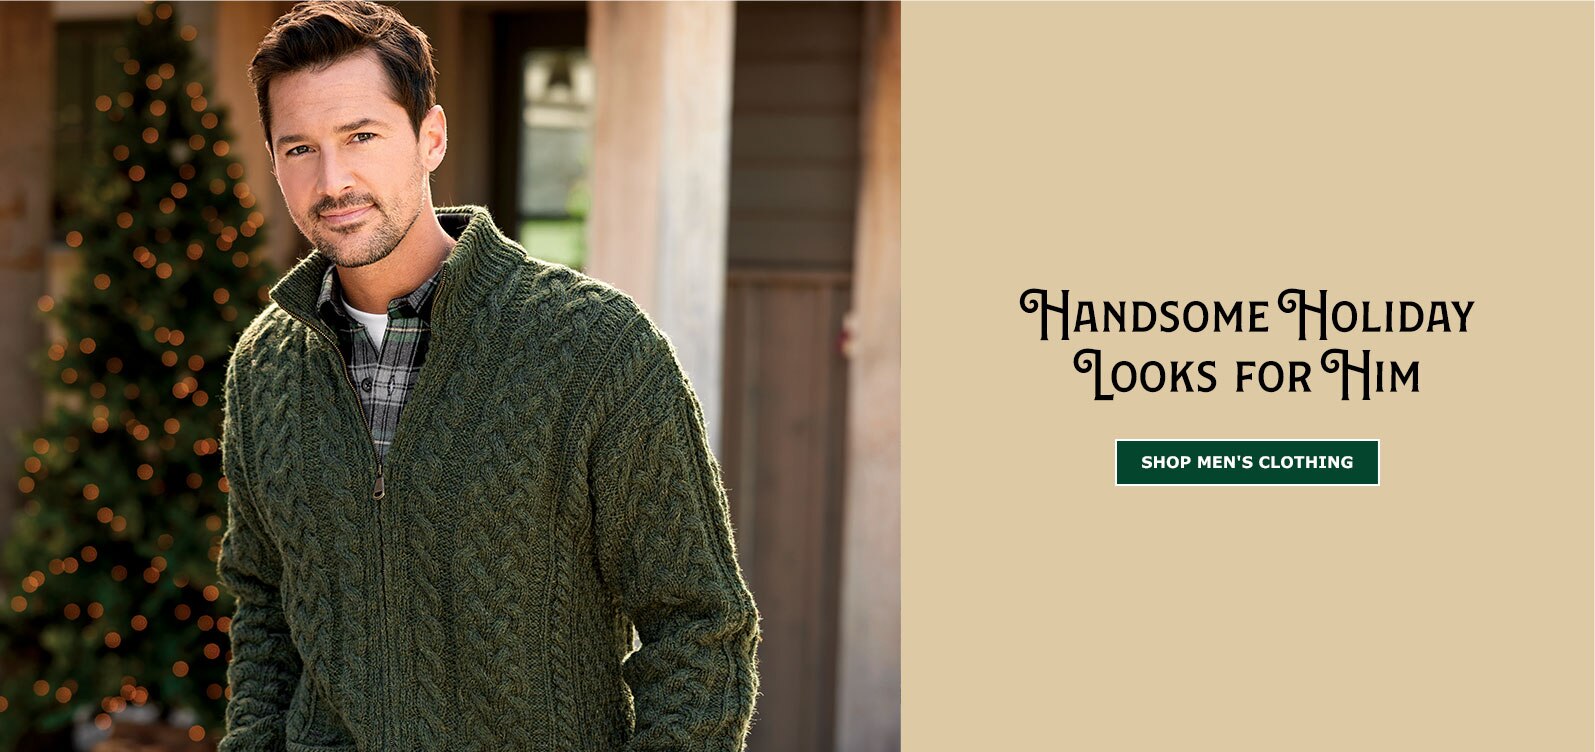 Handsome Holiday Looks for Him. Shop Men's Clothing